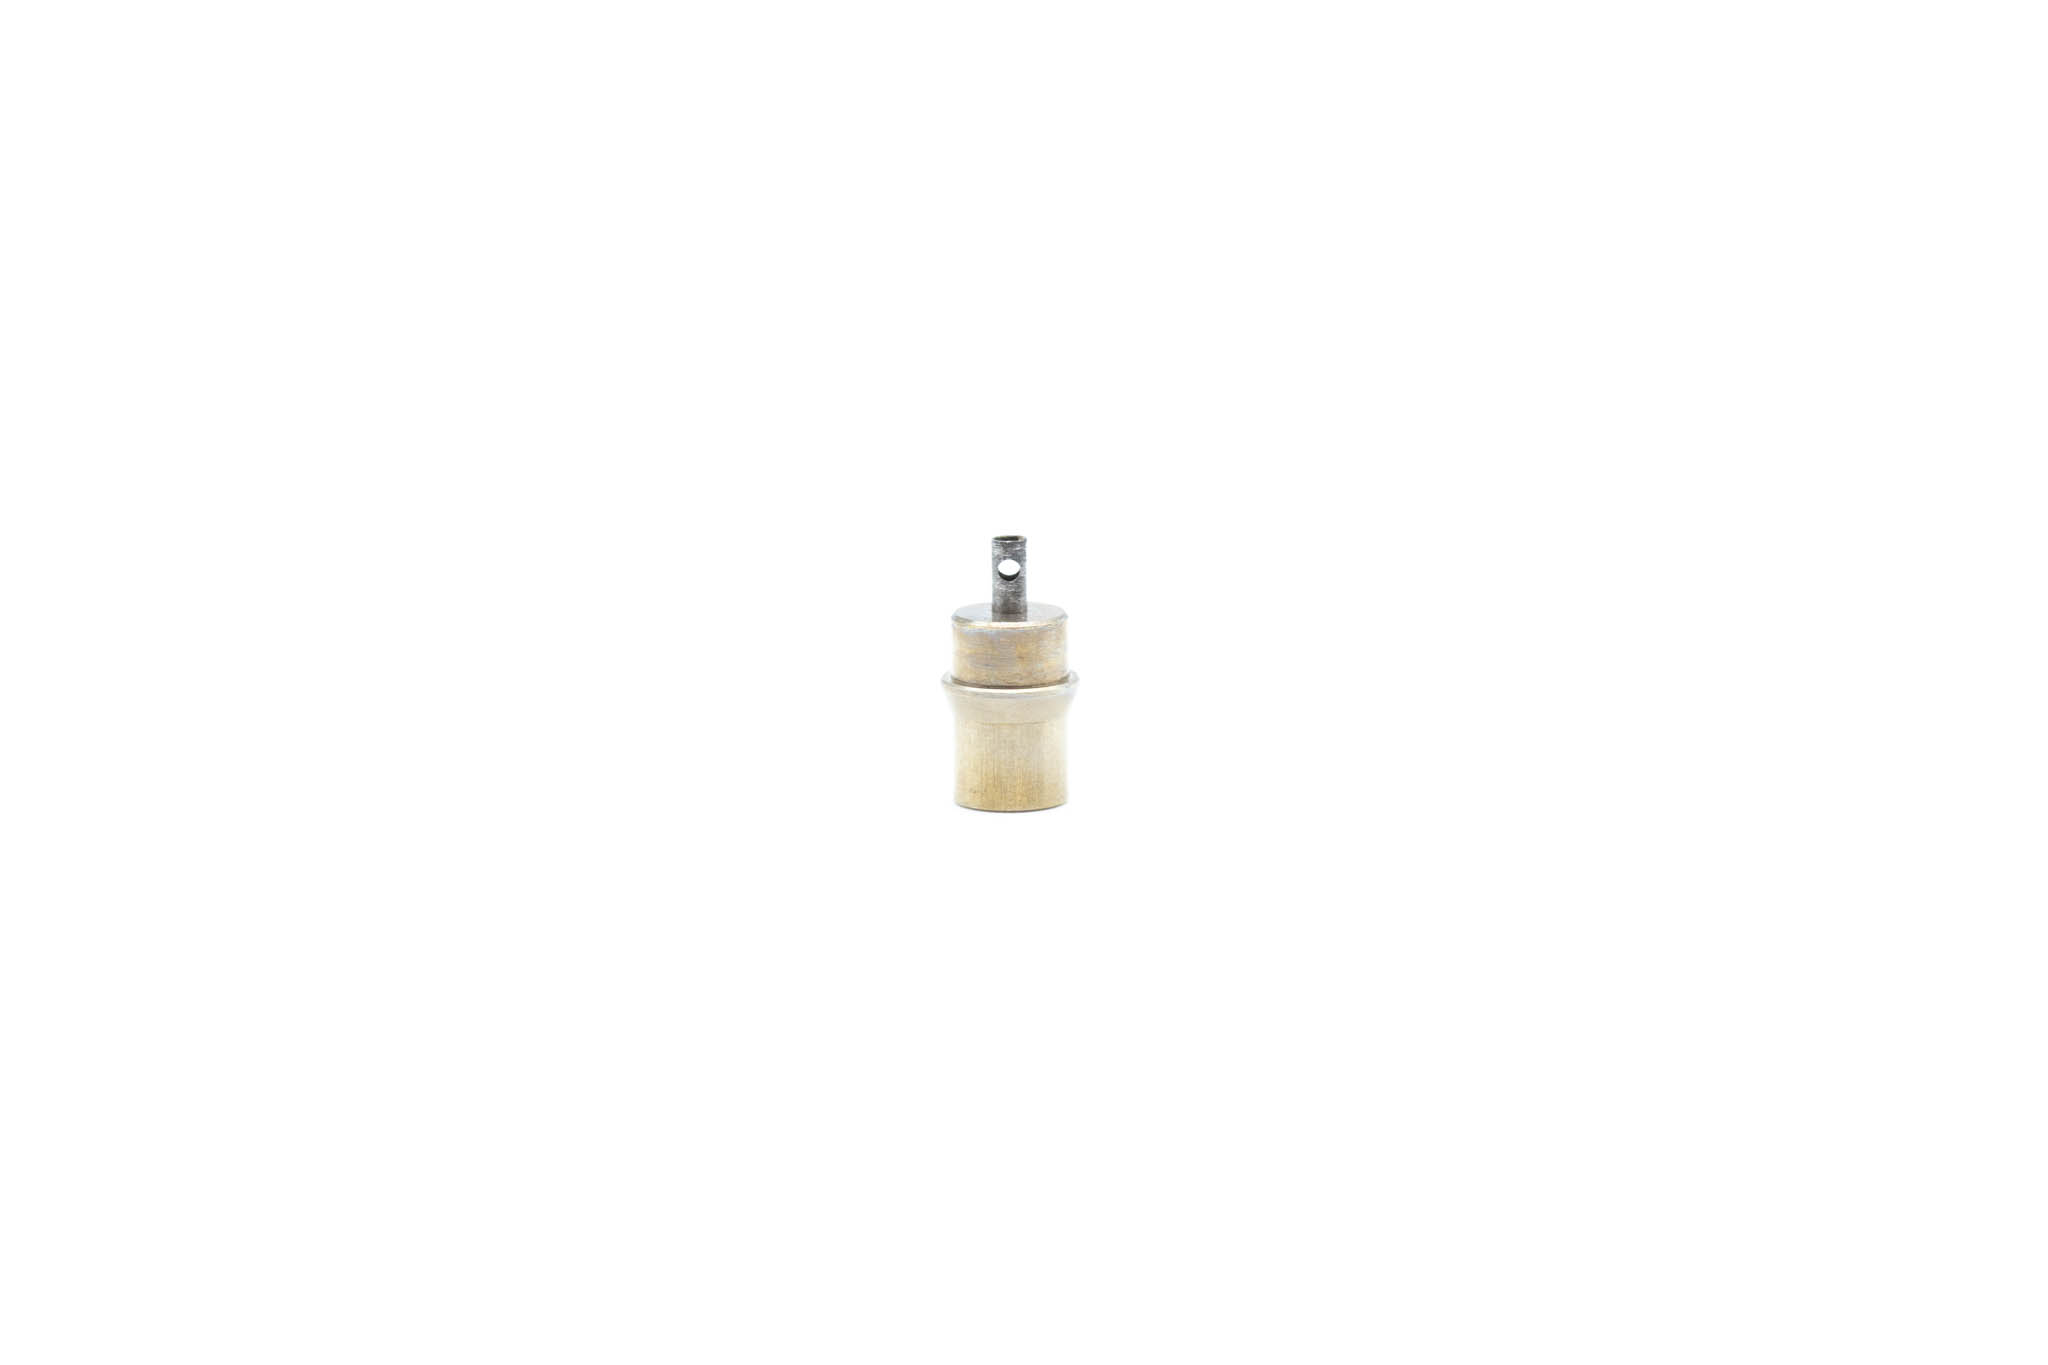 OEM Insertion Tube Proximal End Fitting - BF-N20